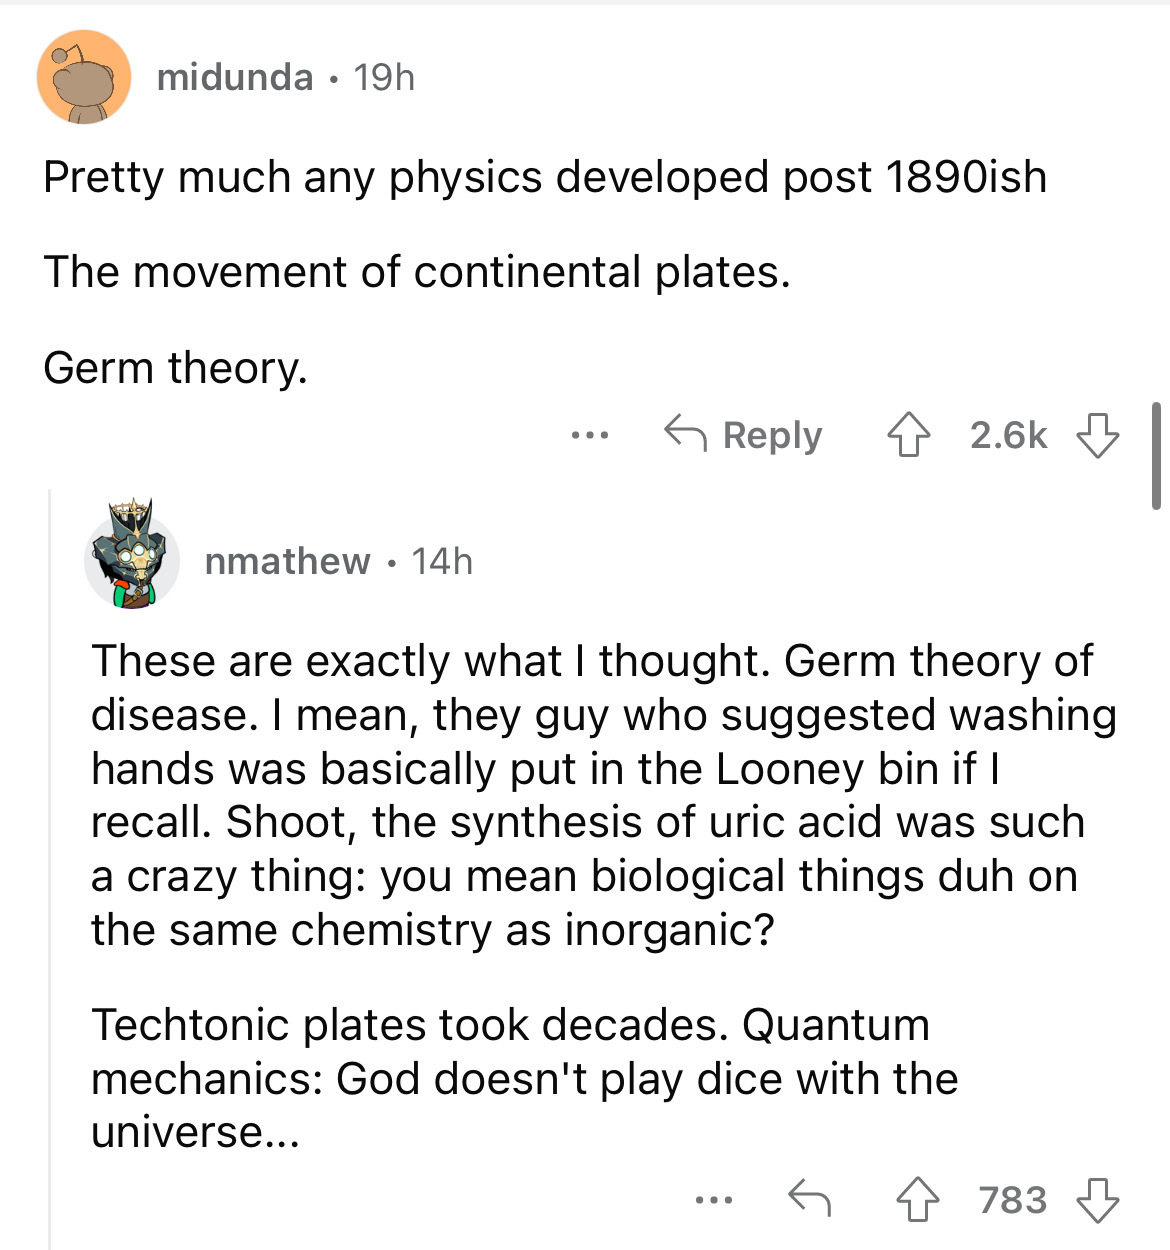 angle - midunda 19h Pretty much any physics developed post 1890ish The movement of continental plates. Germ theory. nmathew 14h ... These are exactly what I thought. Germ theory of disease. I mean, they guy who suggested washing hands was basically put in